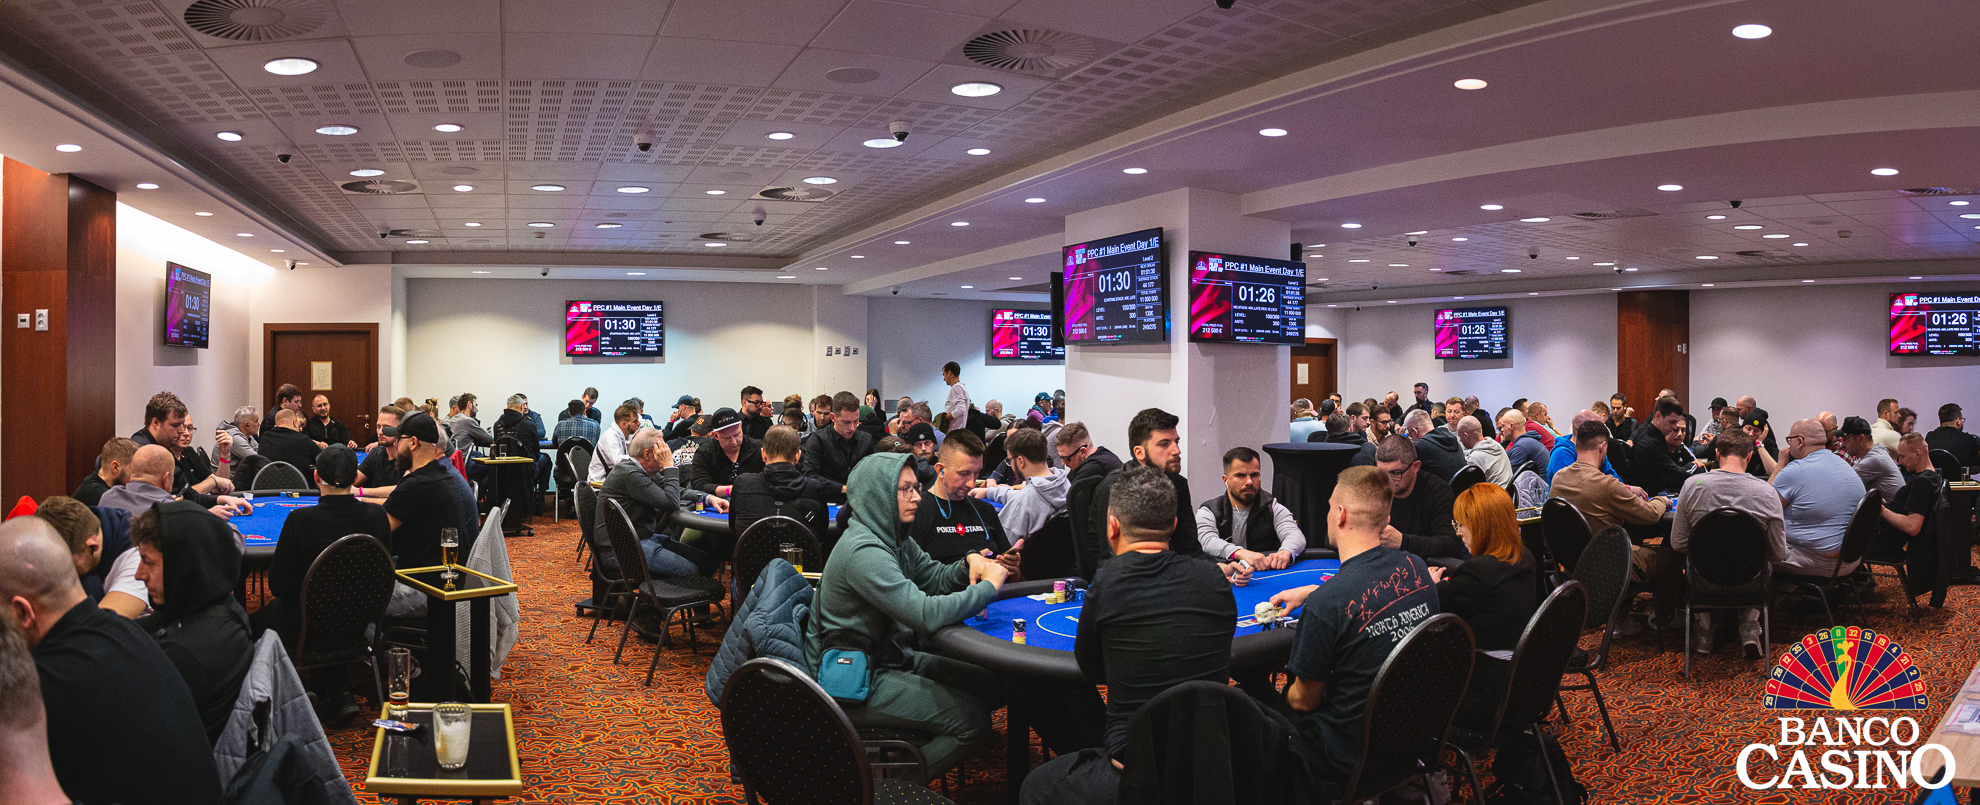 POKER COMMUNITY FROM ALL OVER THE WORLD AT BANCO CASINO ATTACKS RECORDS!